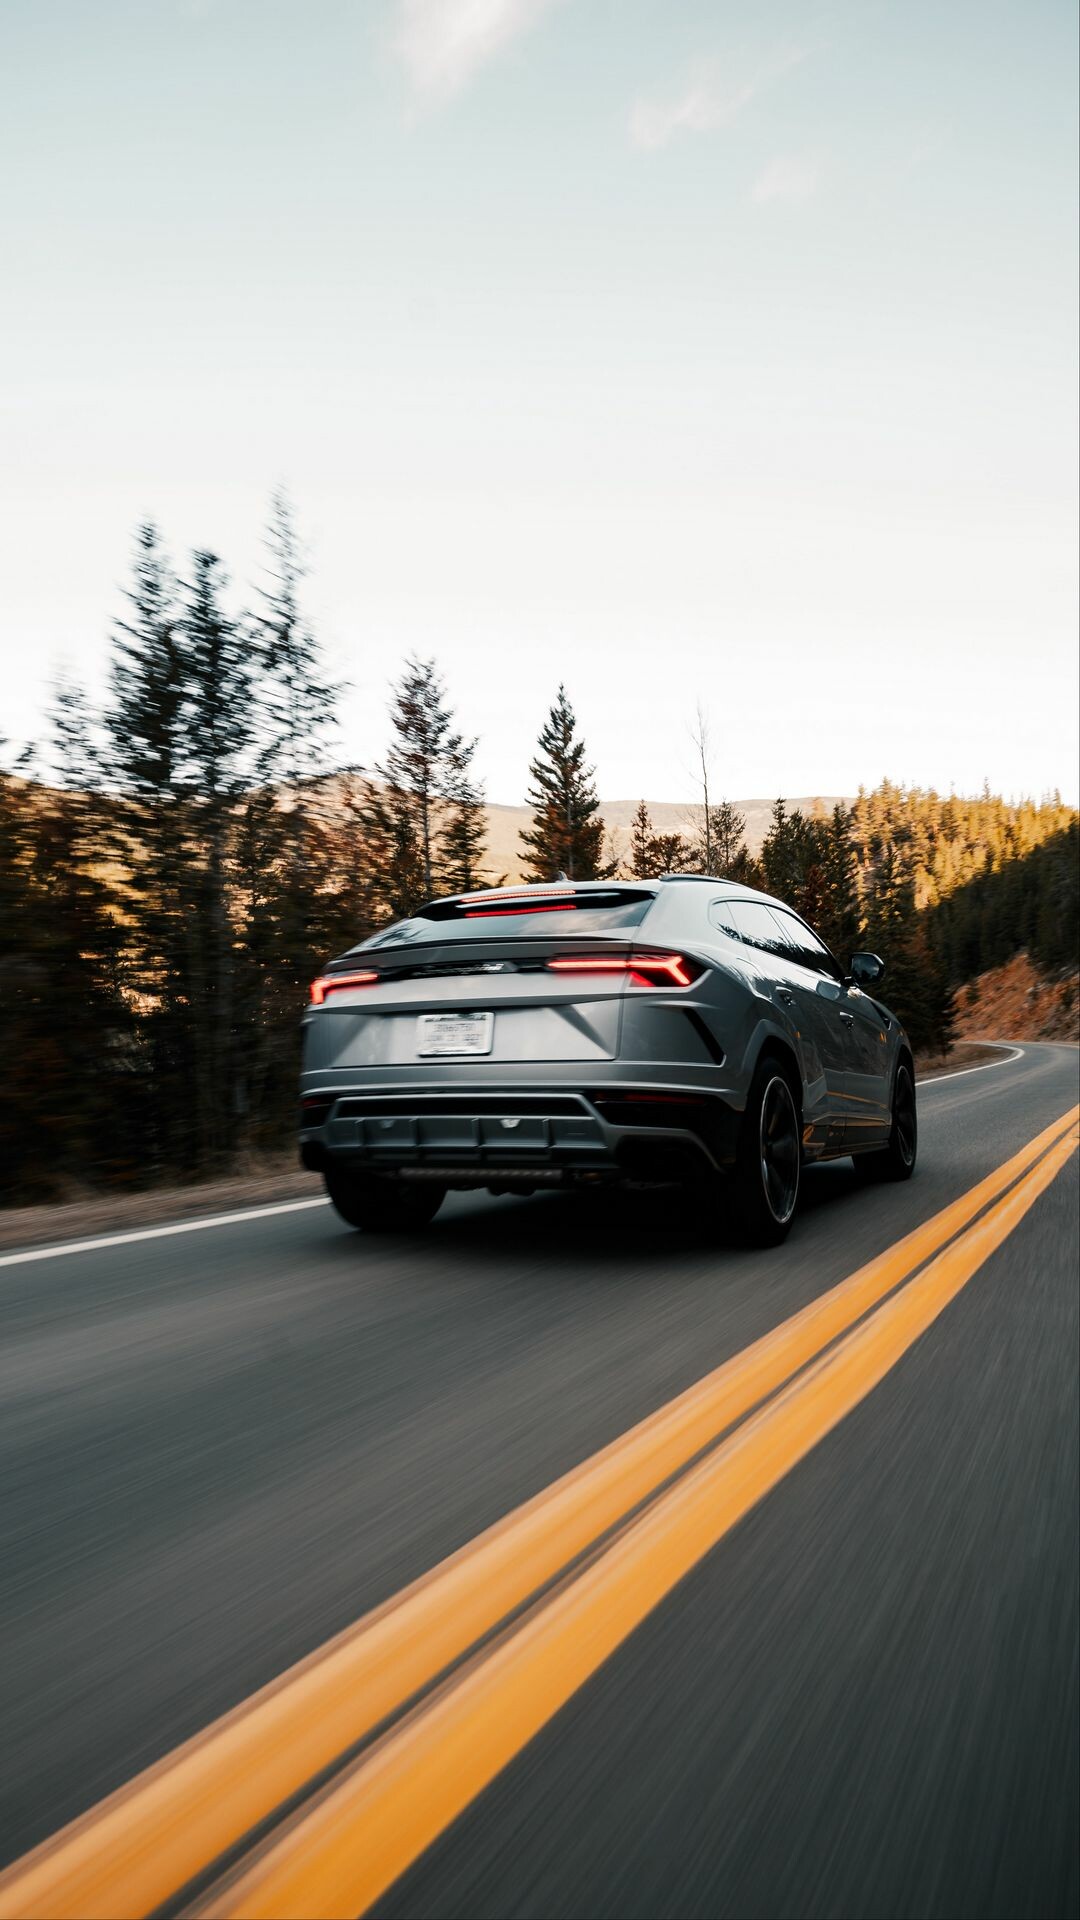 Lamborghini: The company produces the Urus SUV, powered by a twin-turbo V8 engine. 1080x1920 Full HD Background.